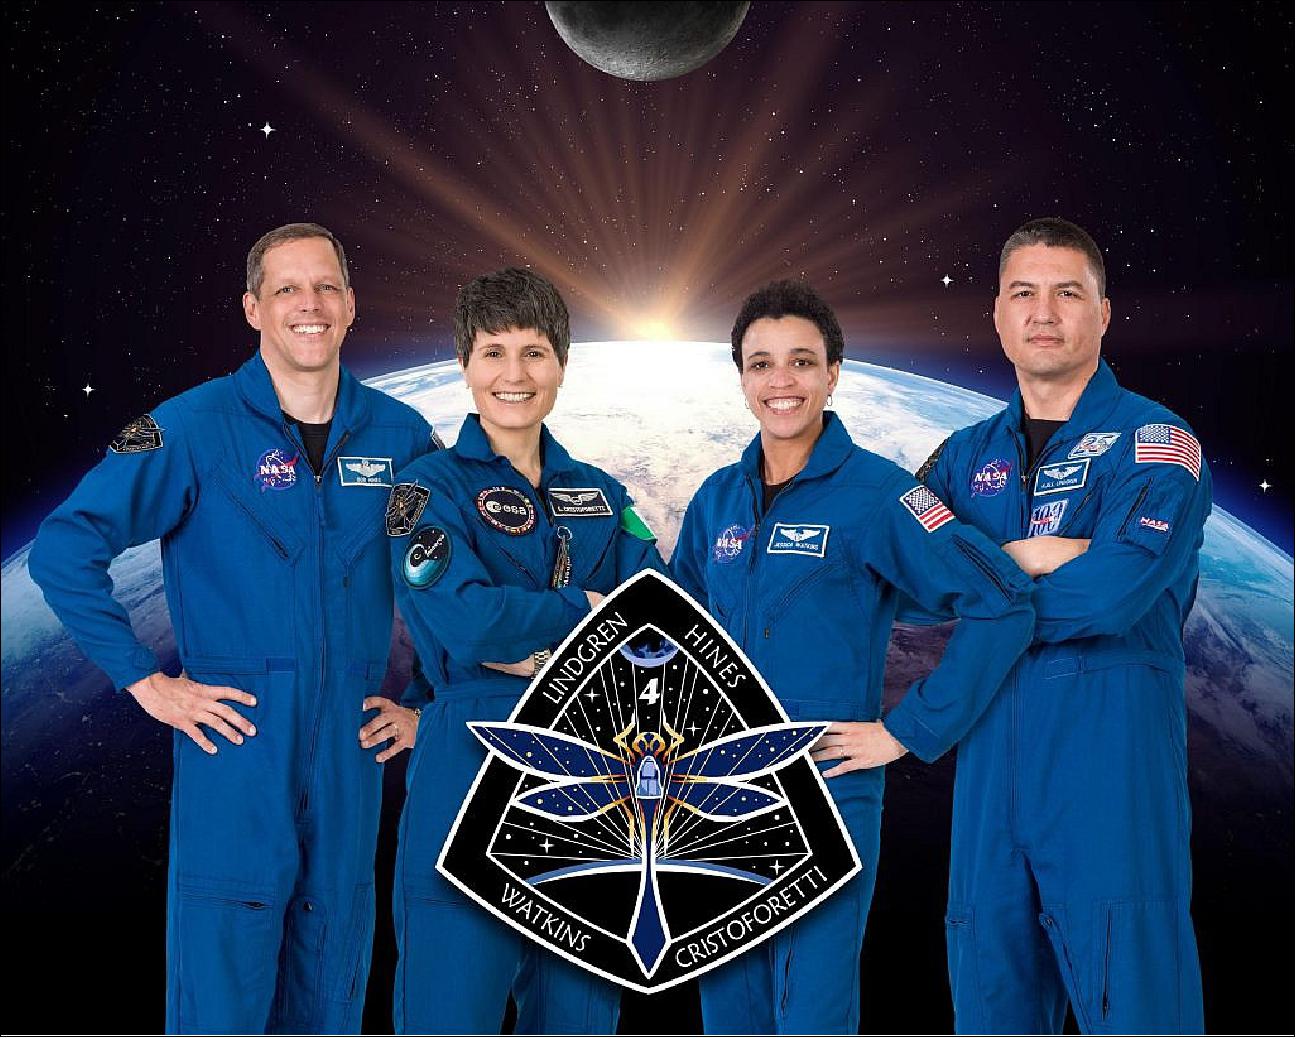 Crew-3 (Crew-3 mission on SpaceX's Crew Dragon spacecraft) - eoPortal